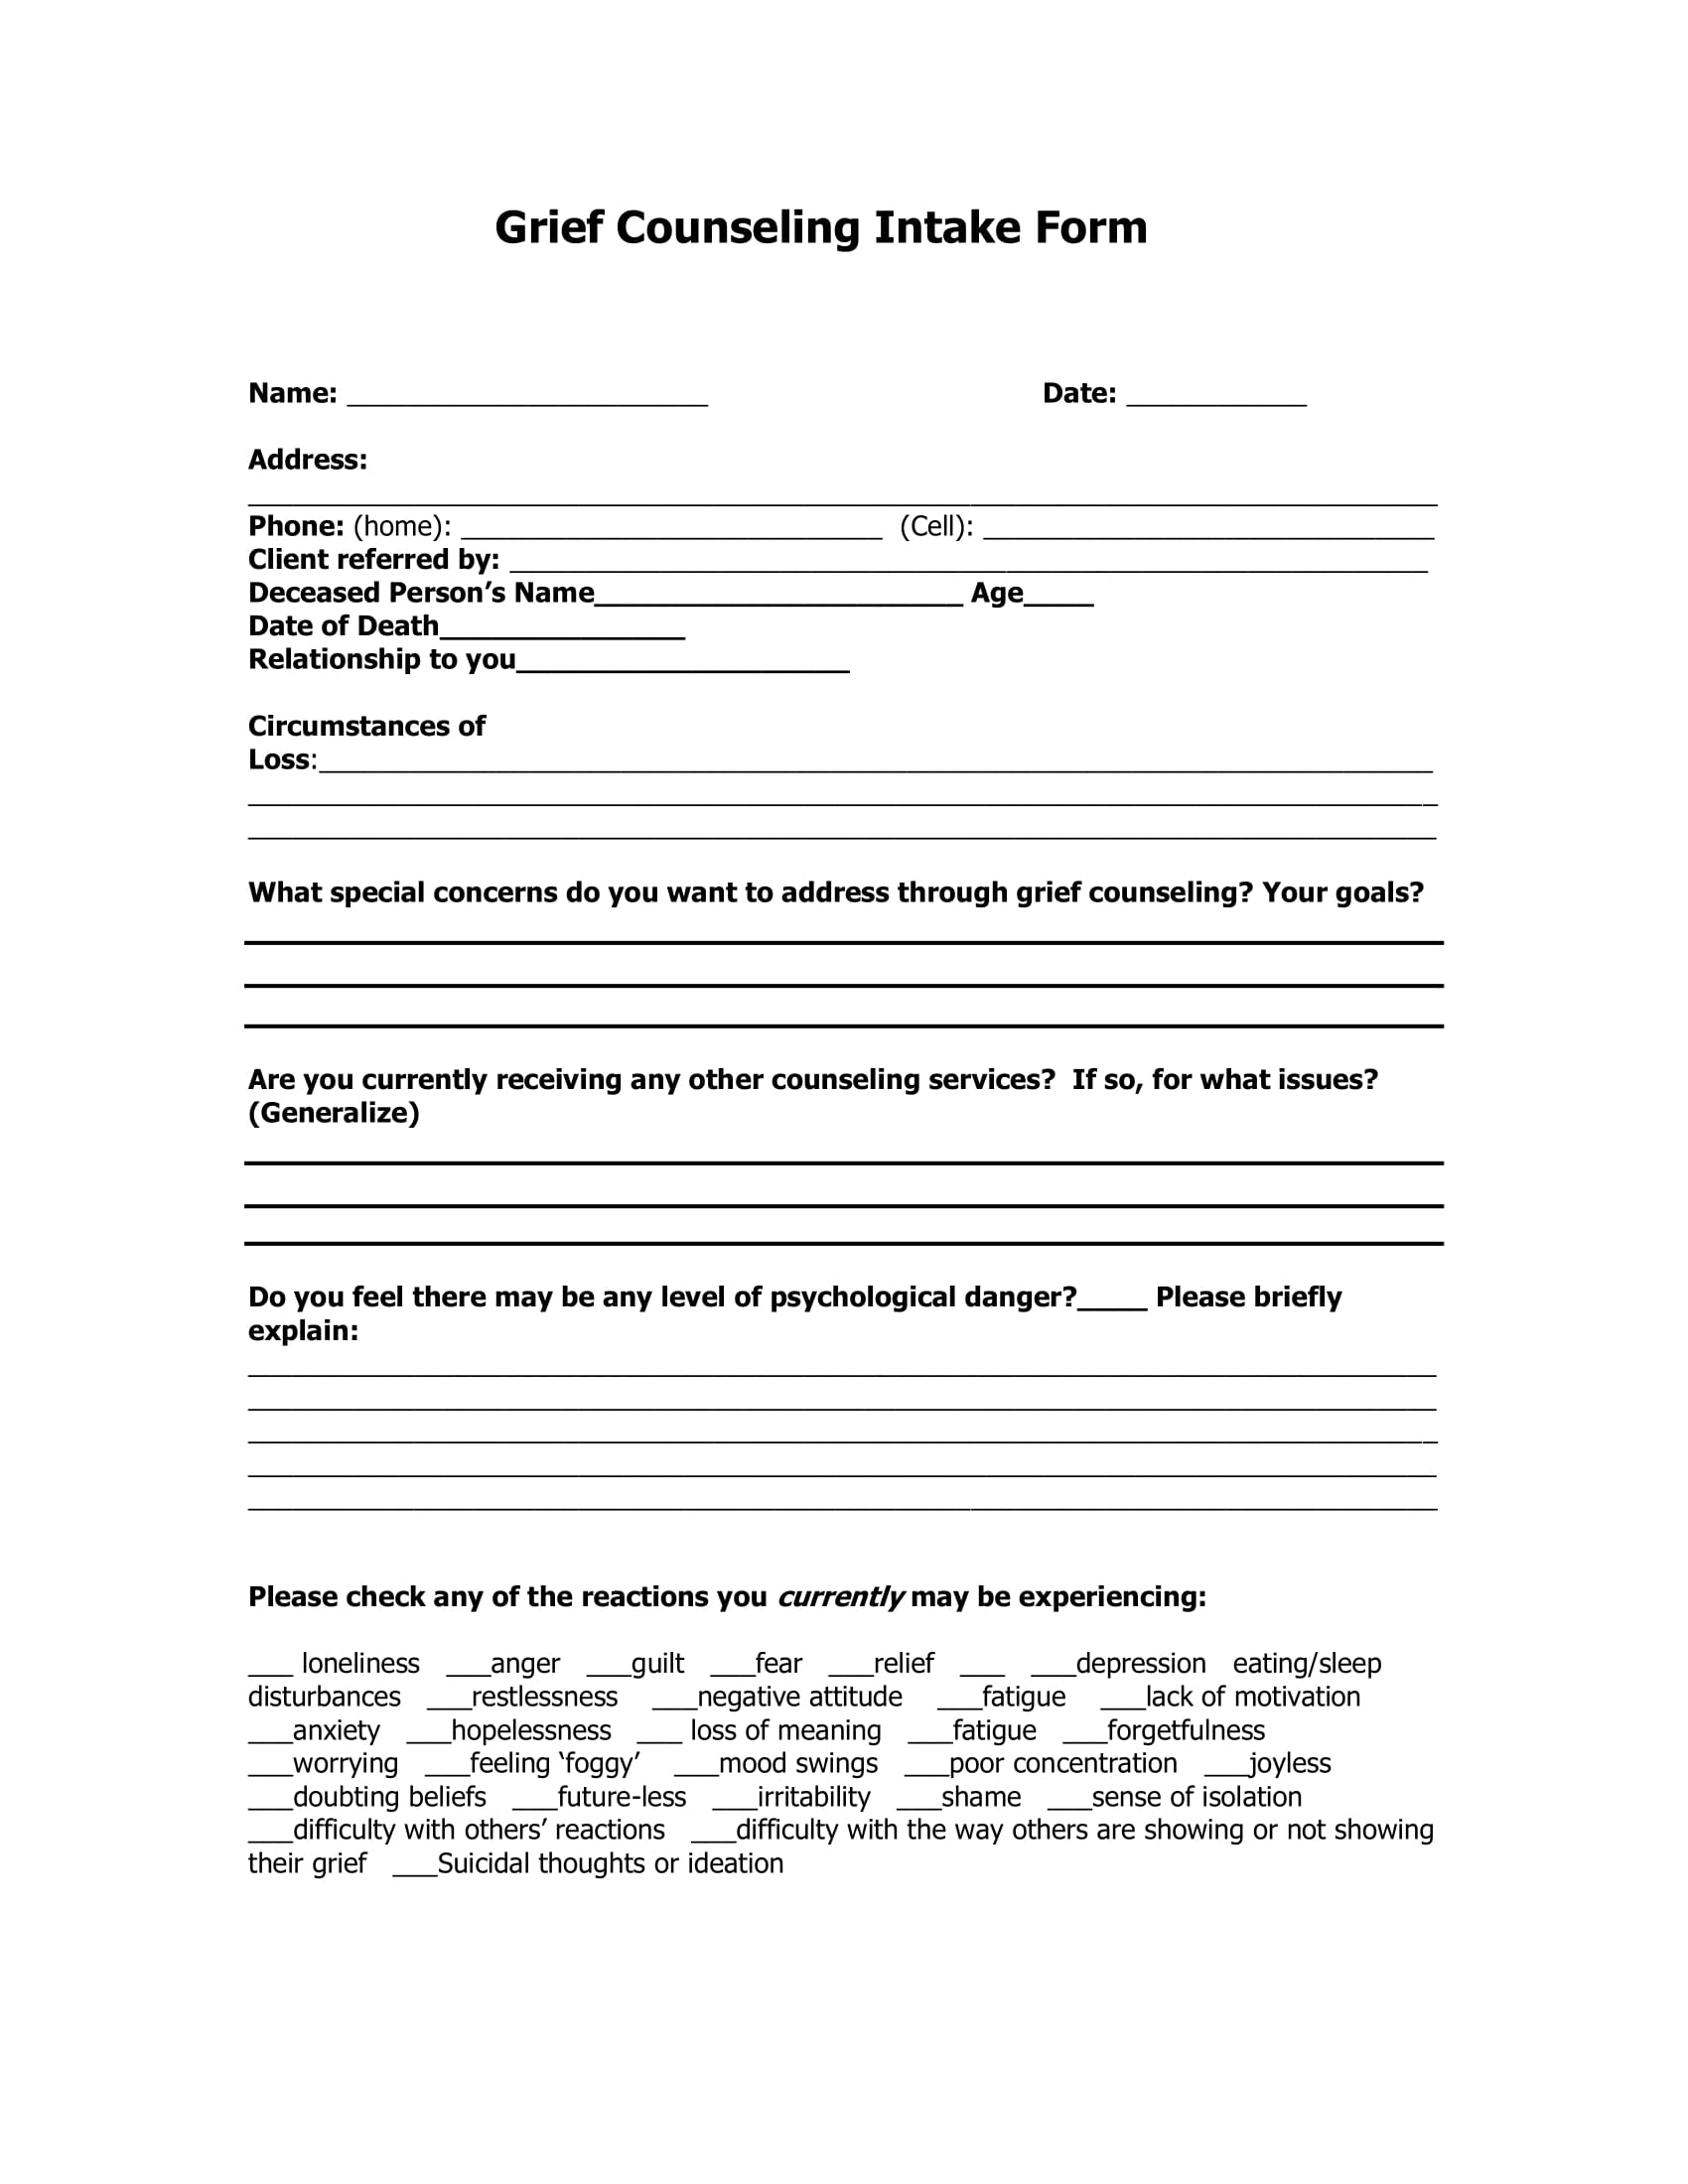 grief counseling intake form 1